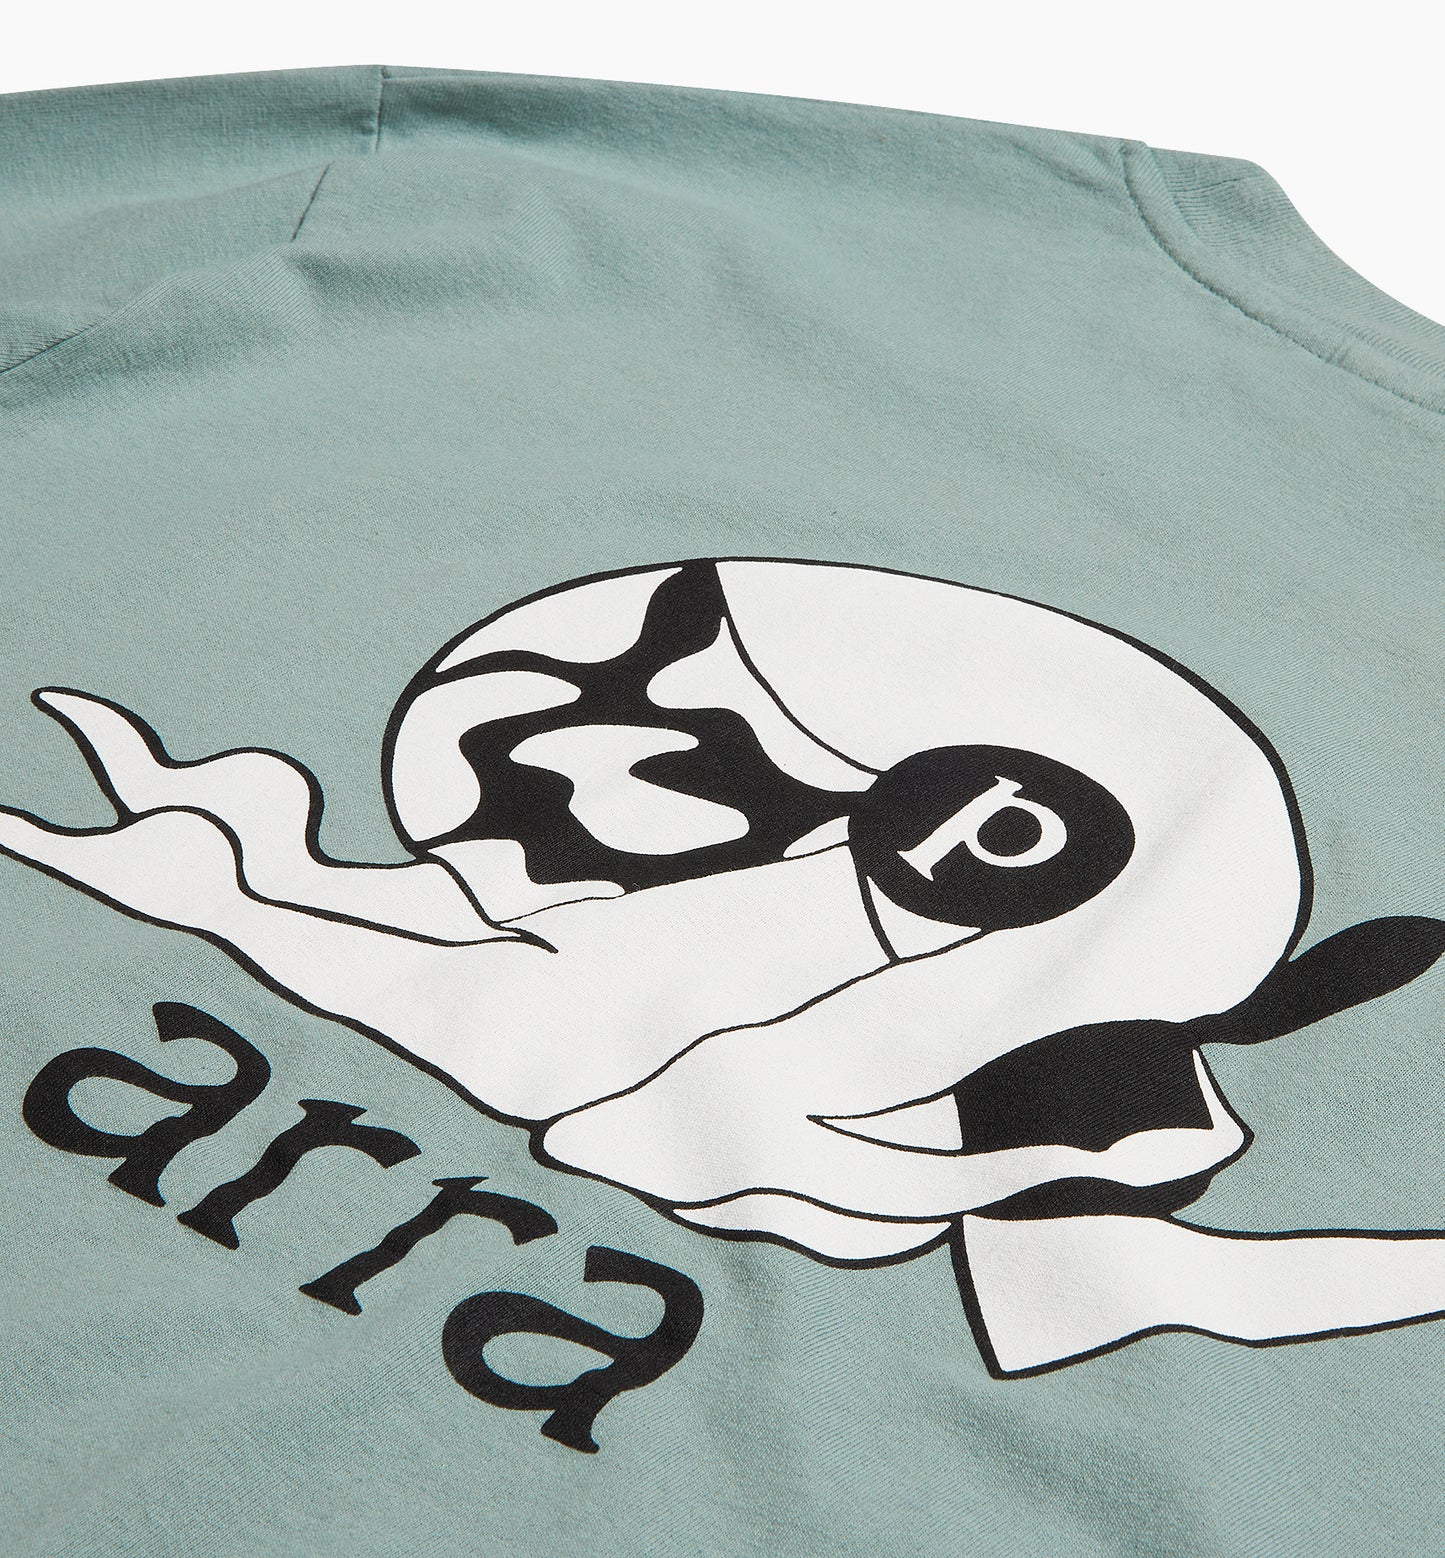 By Parra The Lost Ring Longsleeve T-Shirt Pistache